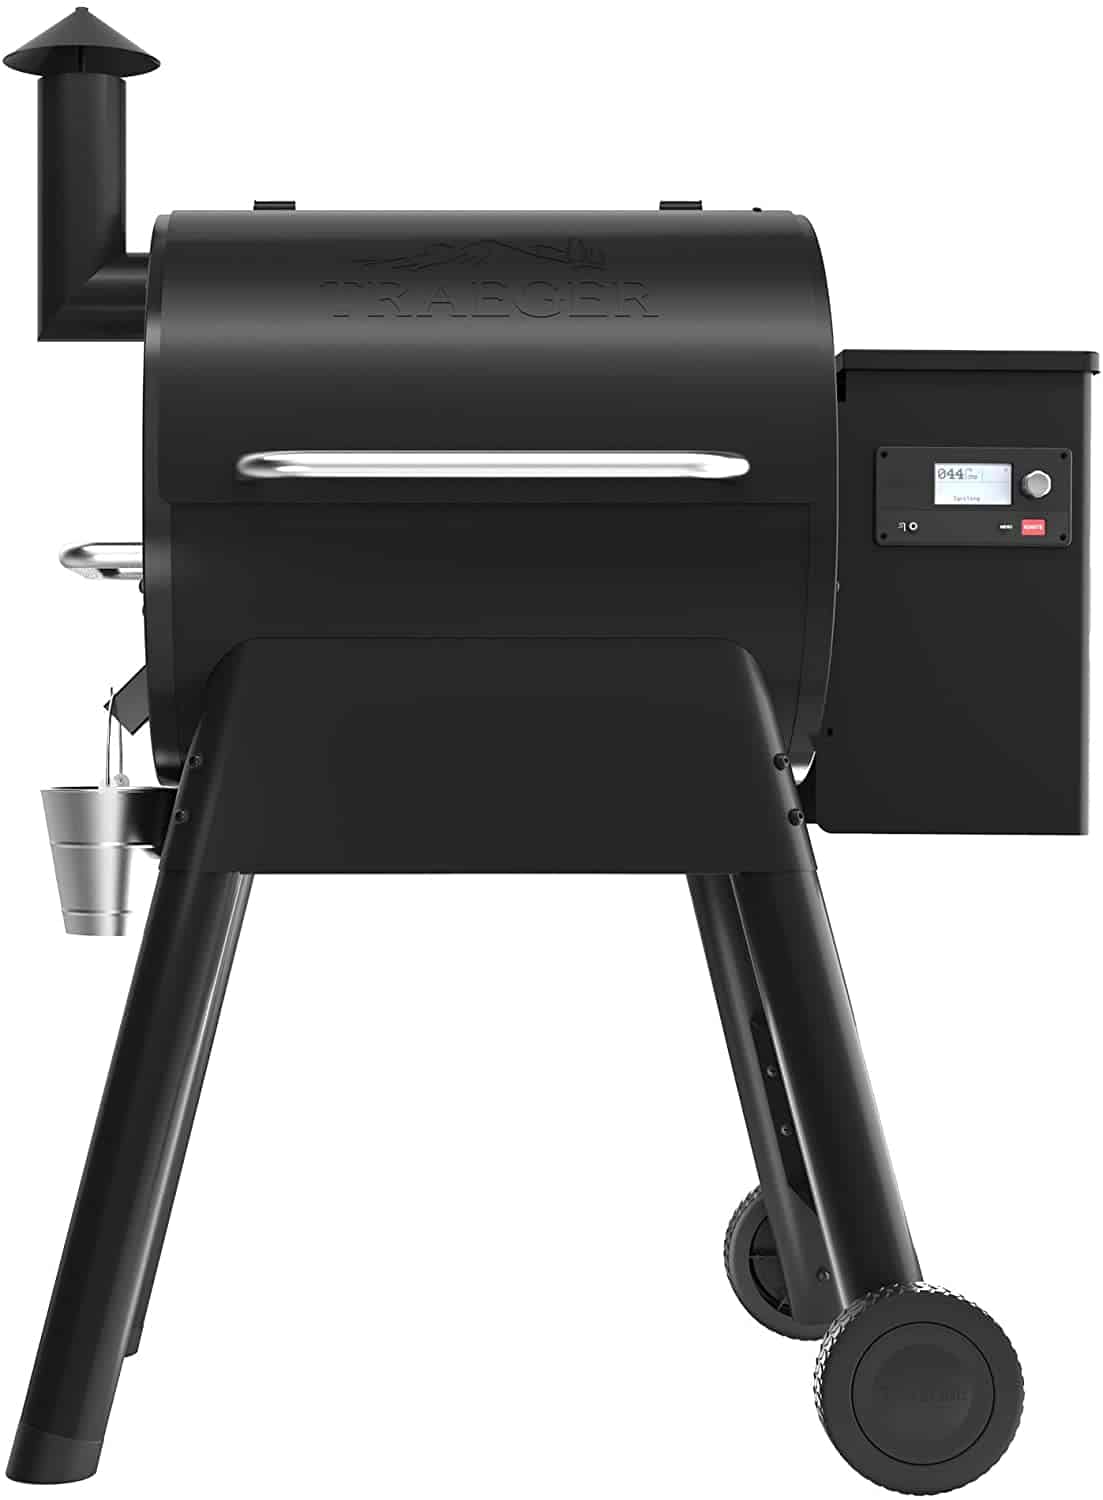 Traeger Grills Pro Series 575 Wood Pellet Grill and Smoker, Black